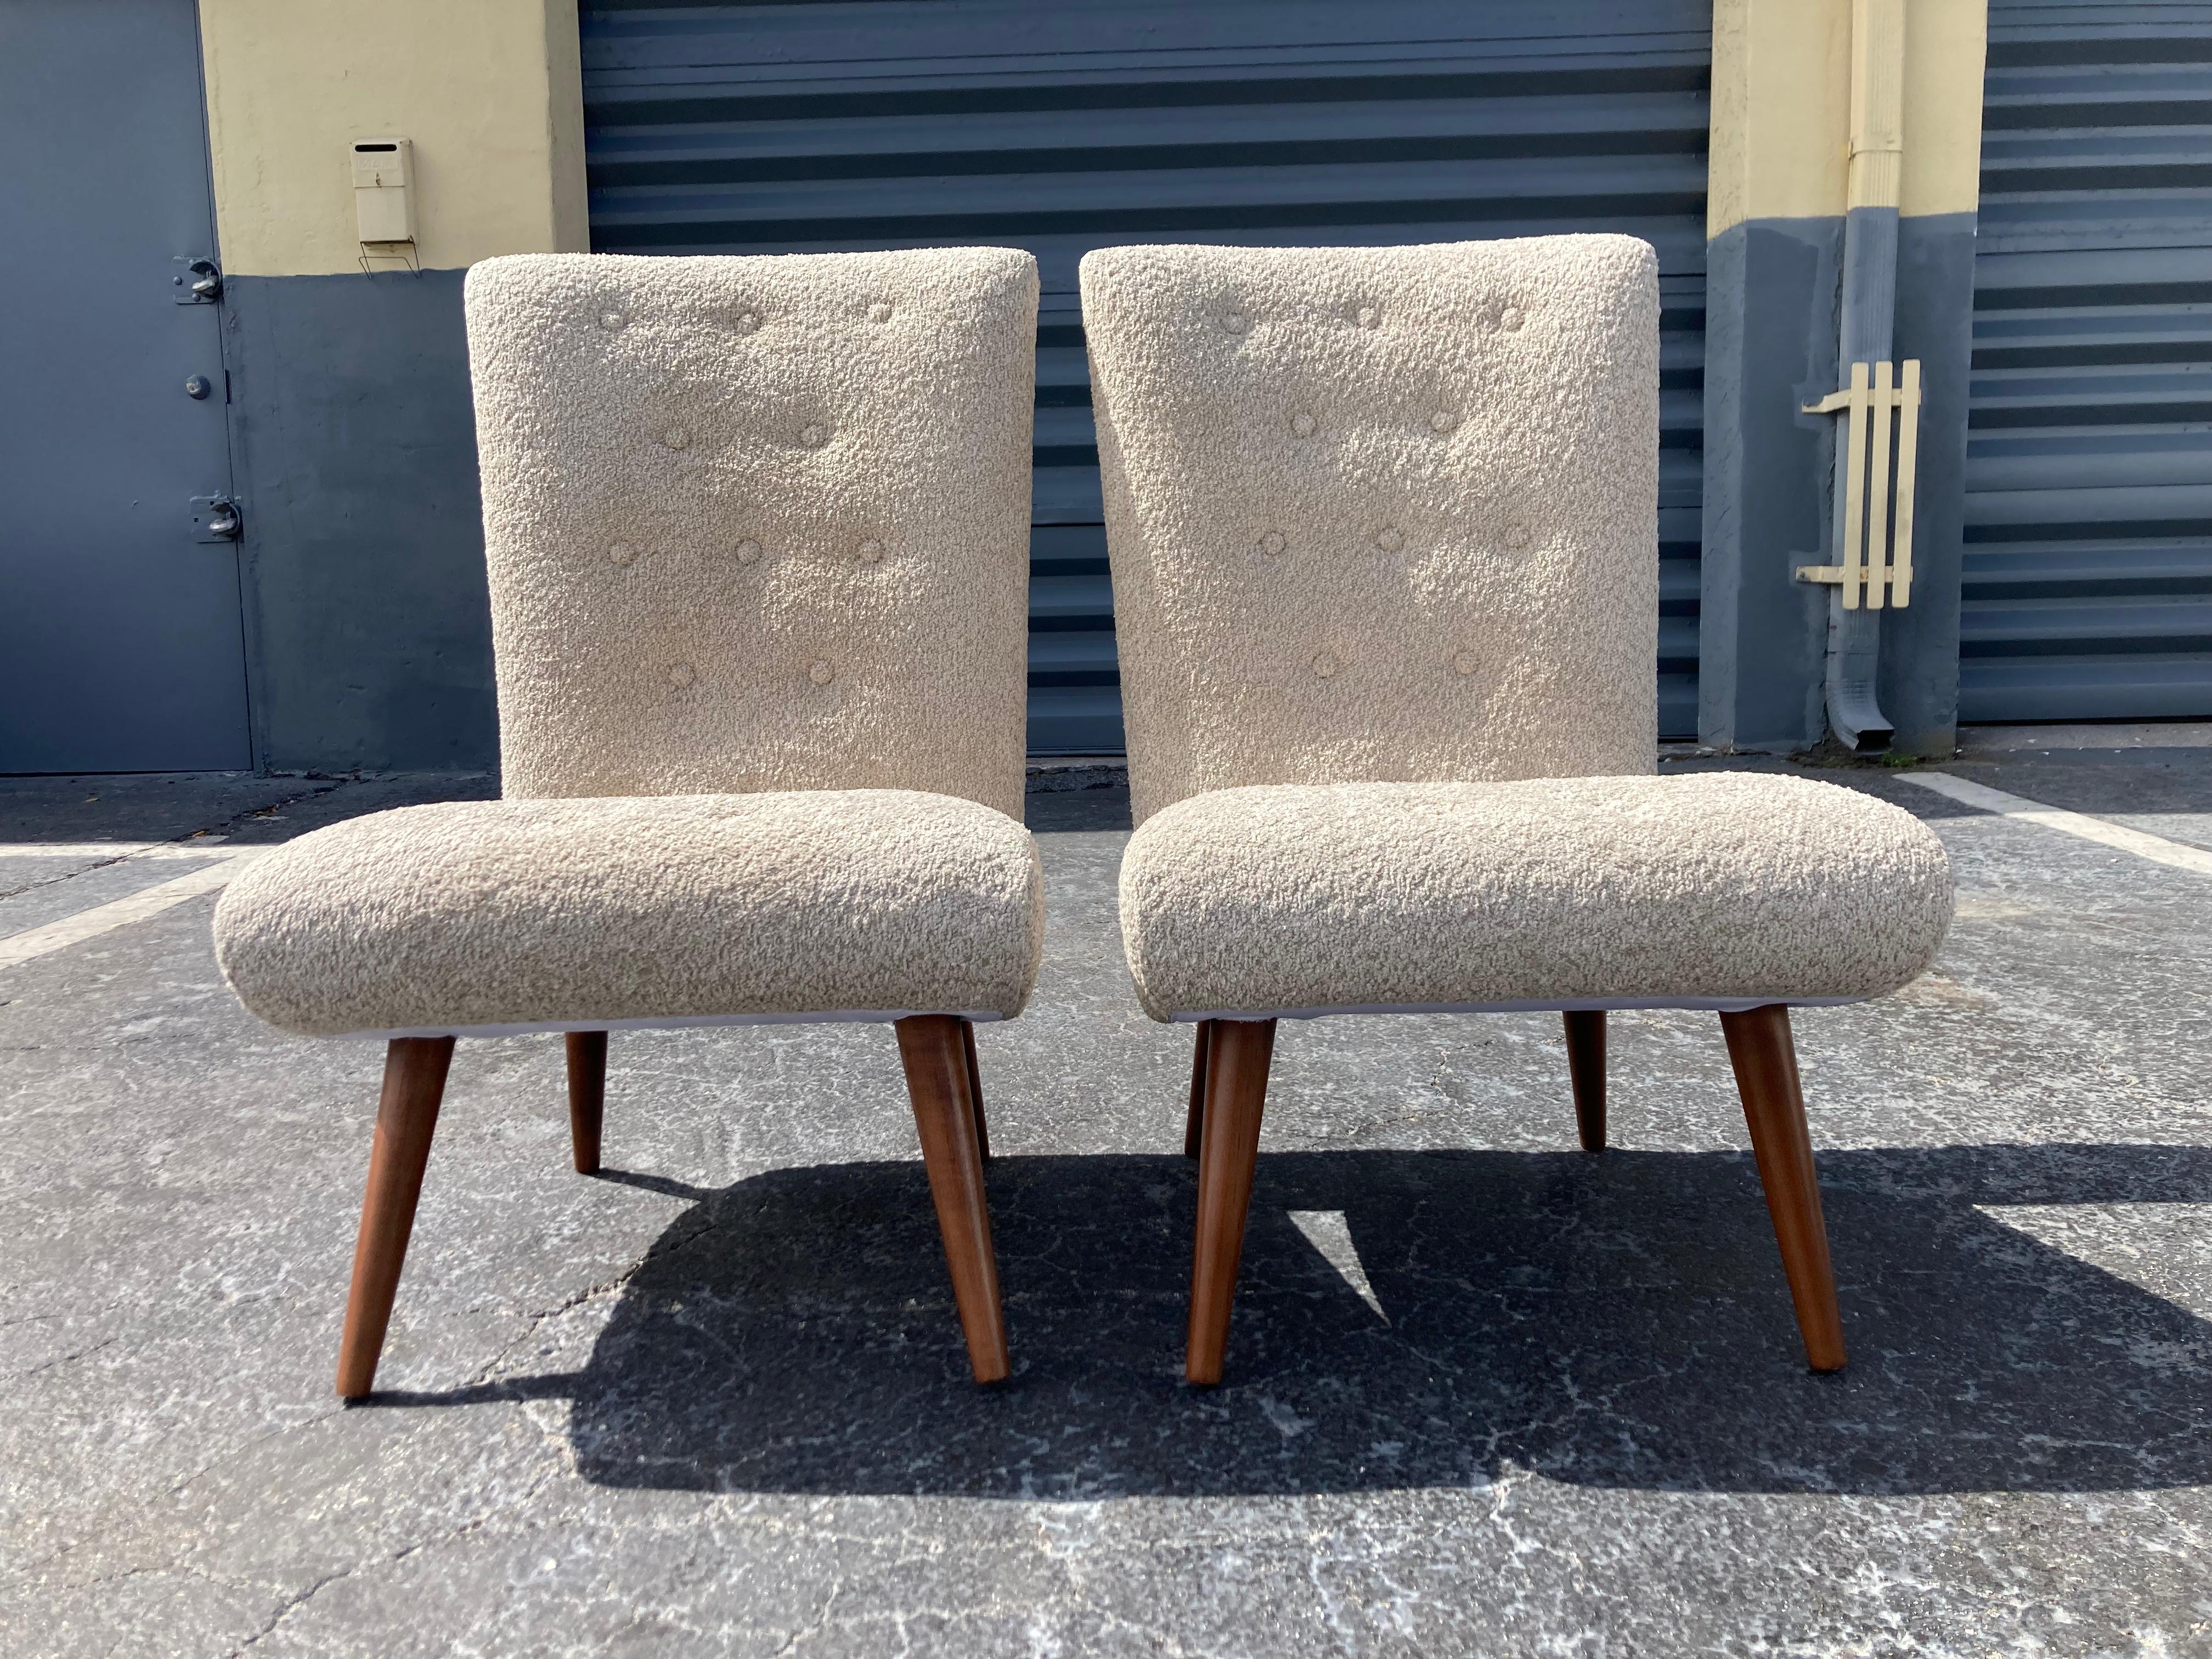 Pair of Mid-Century Modern lounge chairs. Recovered in sand colored boucle fabric, legs have a walnut finish. Each chair has twenty buttons. Ready for a new home.